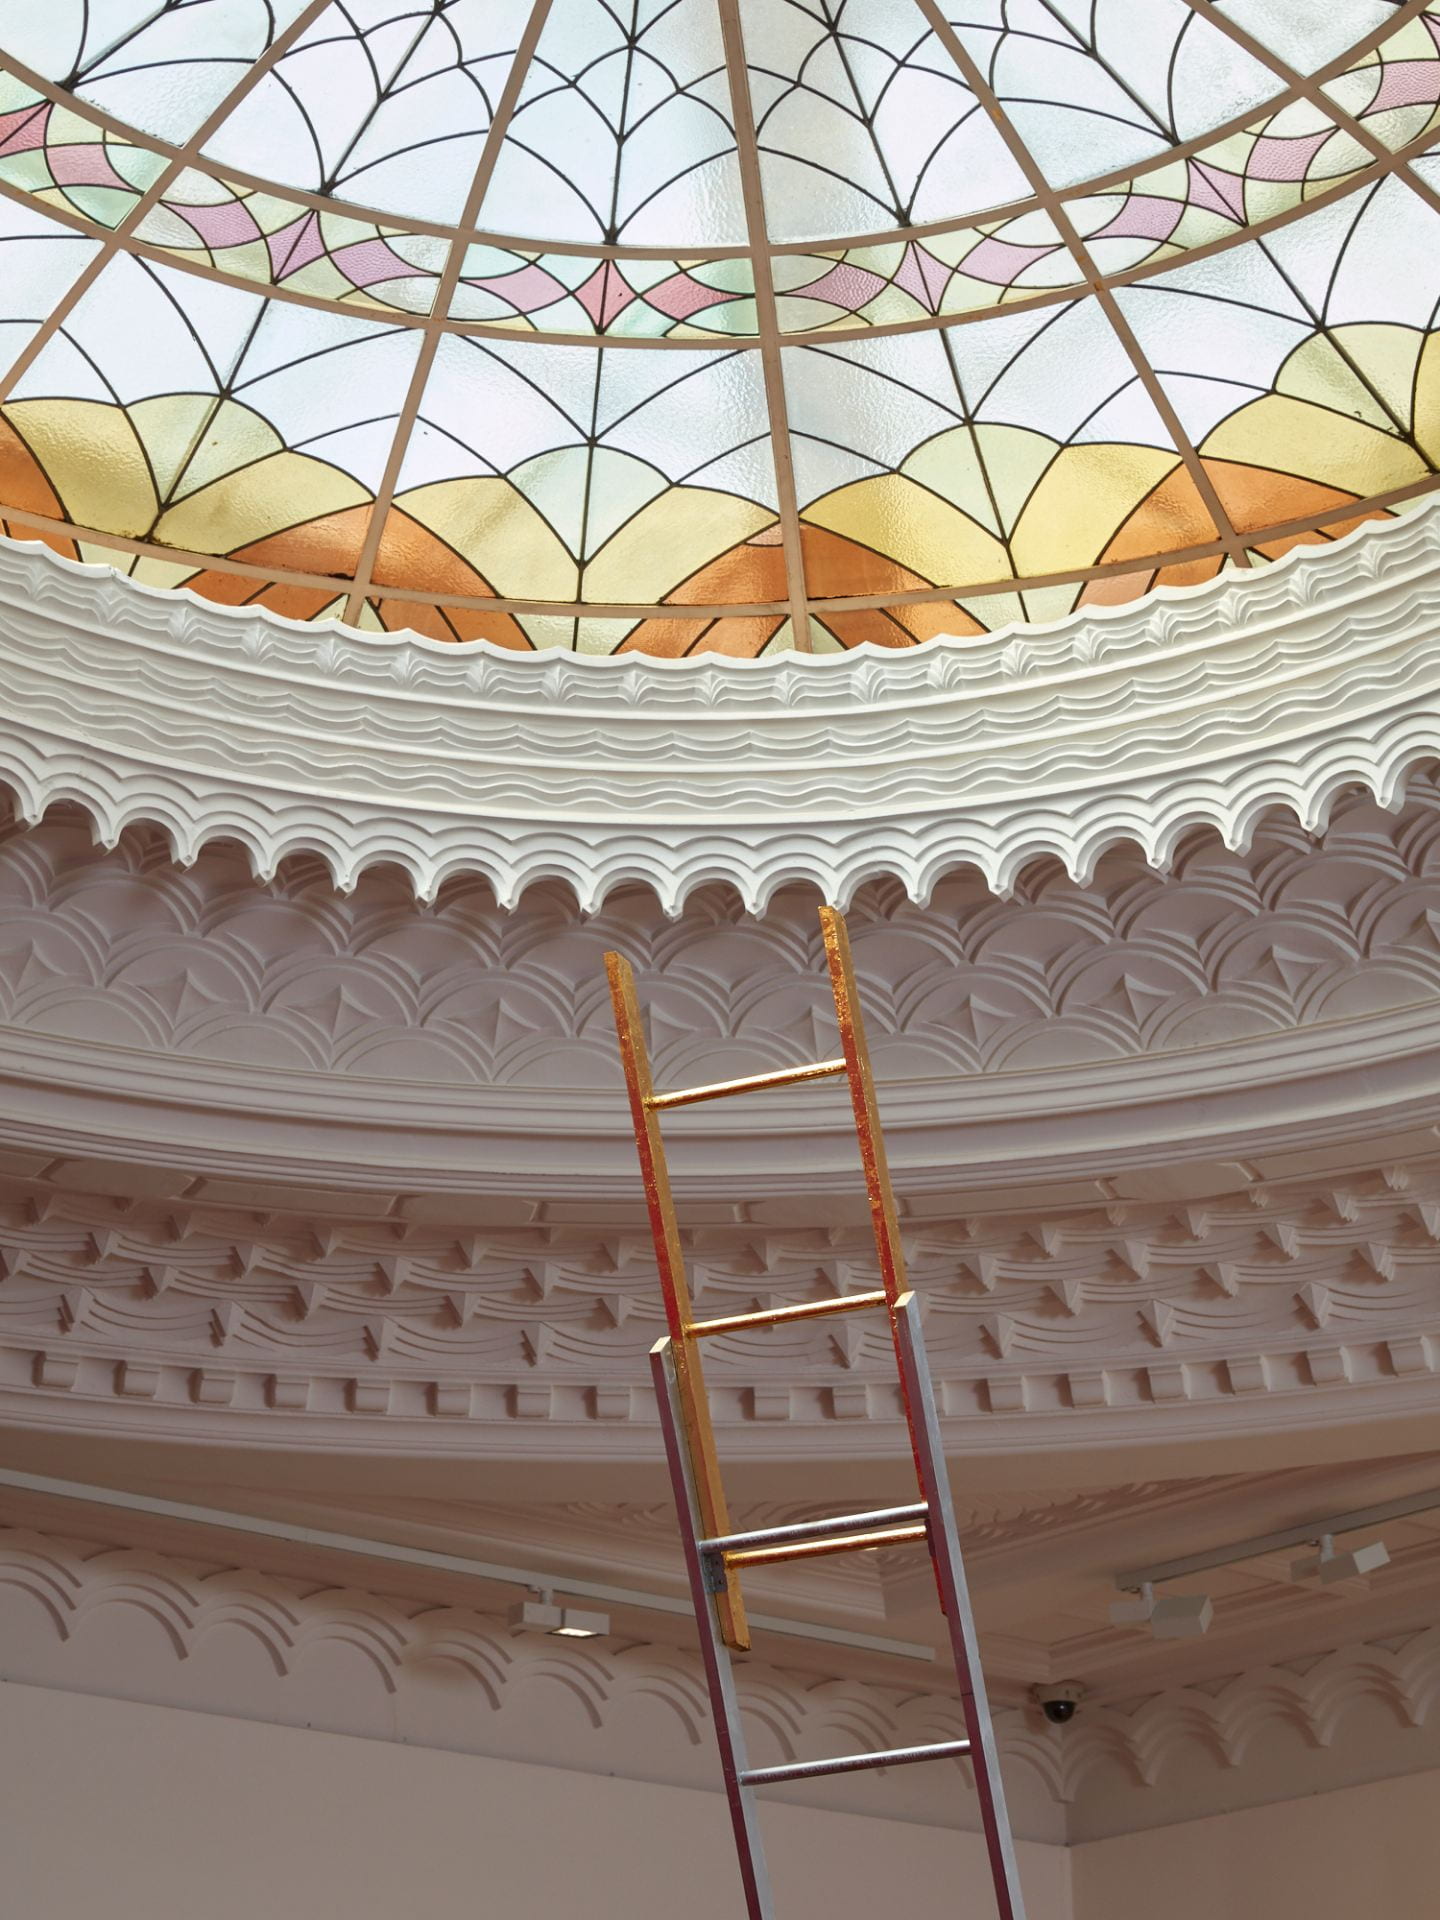 The gilded top of a ladder rises up towards the ceiling. The ceiling is an elaborate stained glass dome, with patterned plaster moulding around the outside.